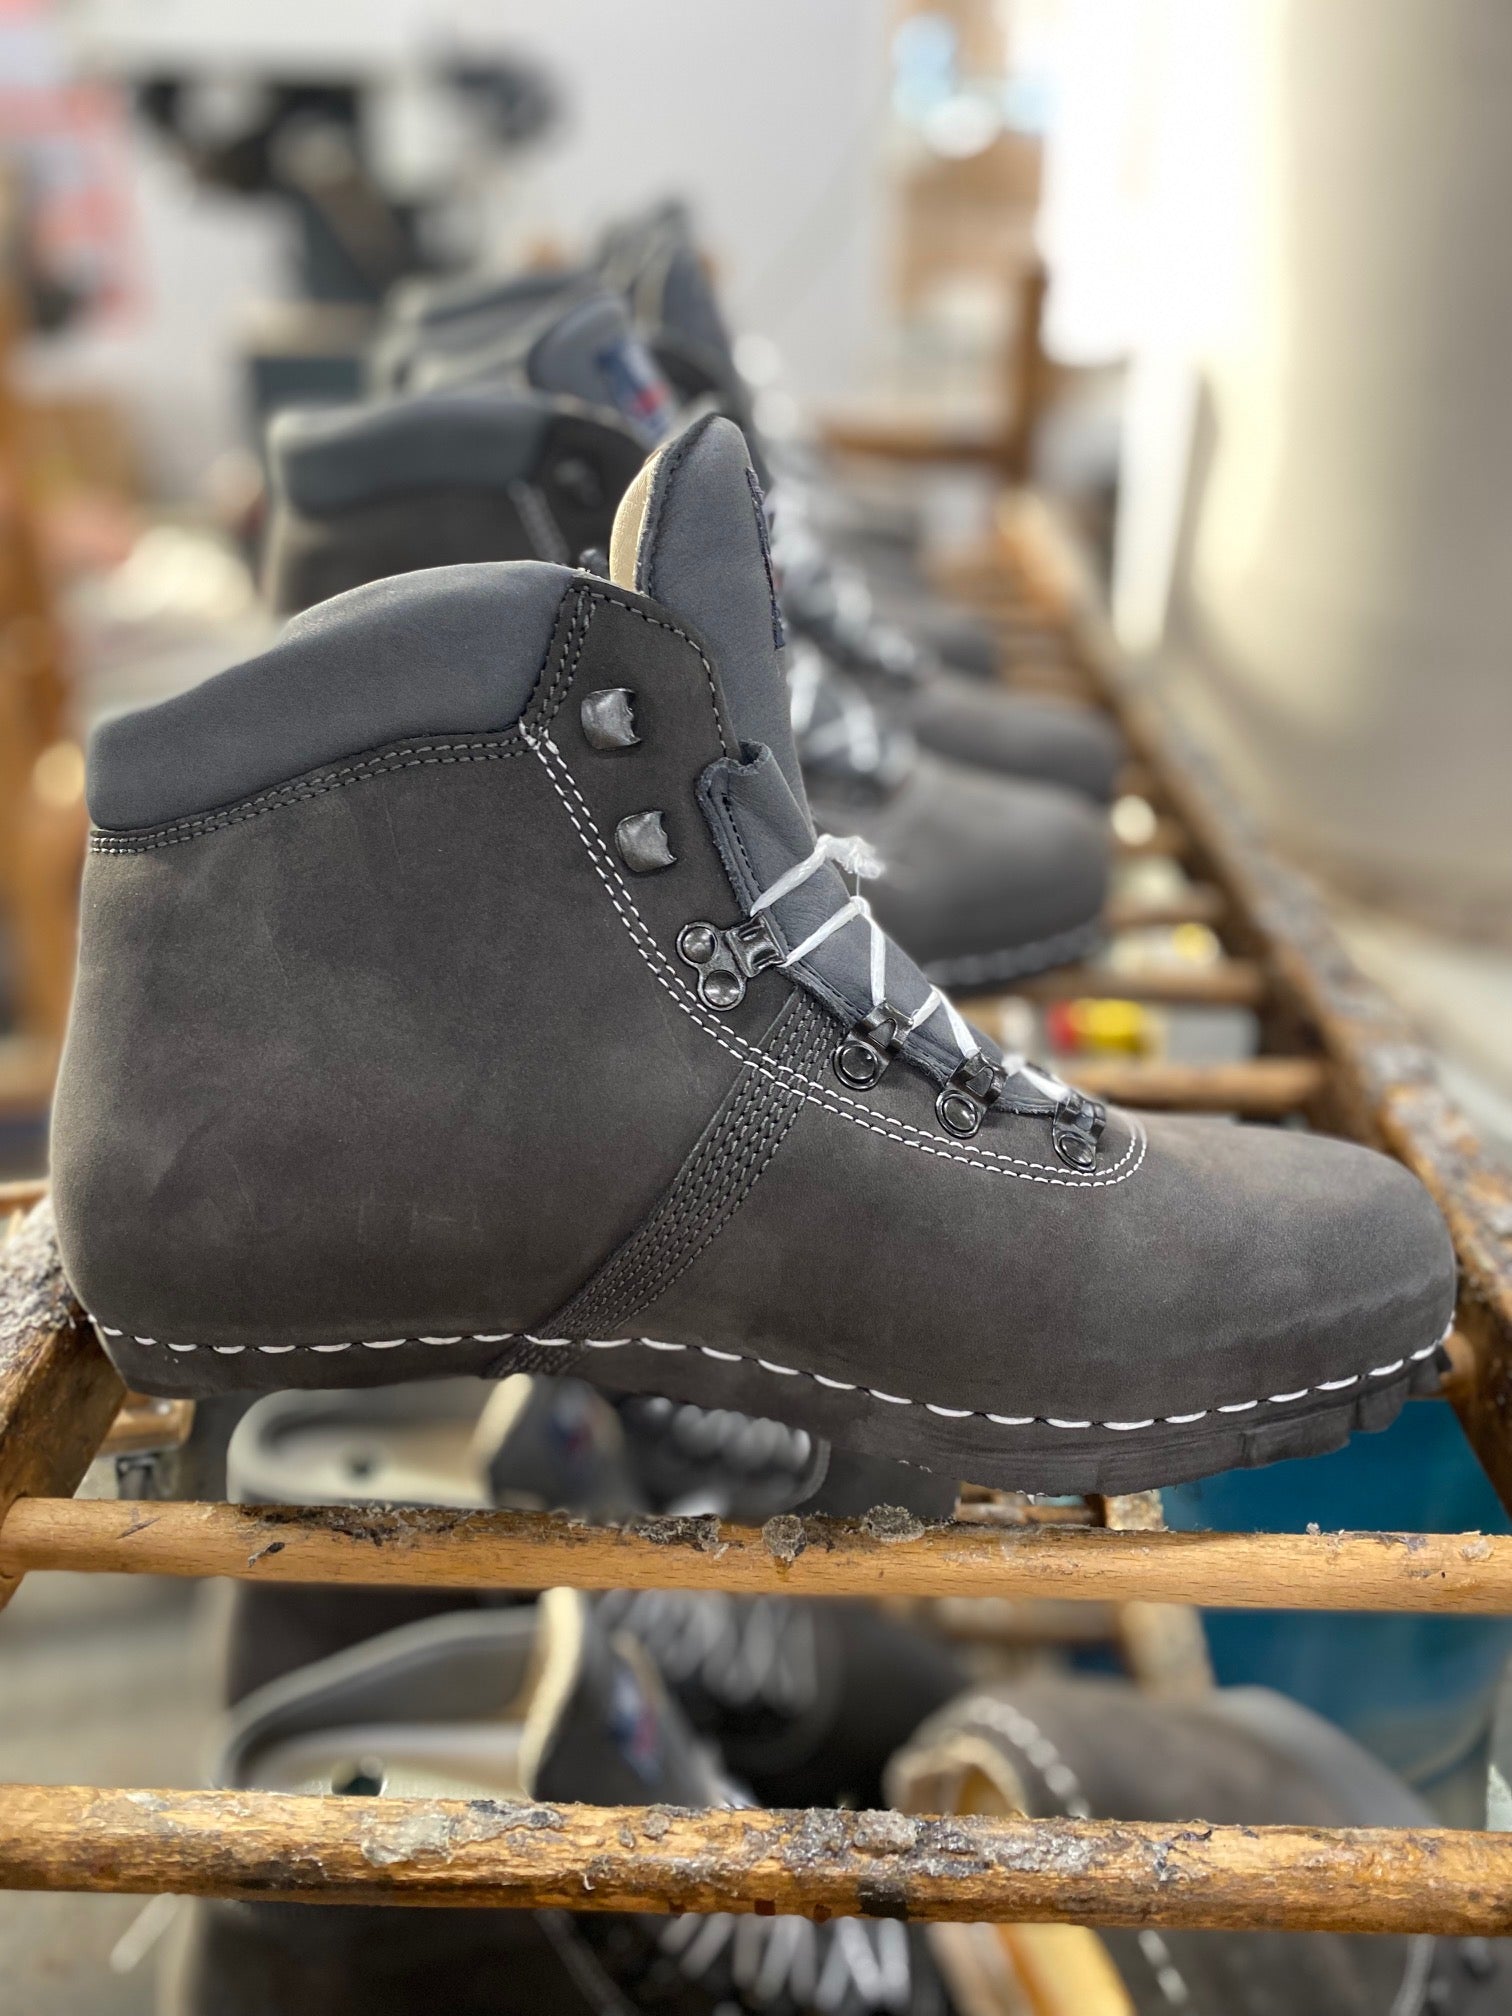 The Ultralight – Limmer Boots